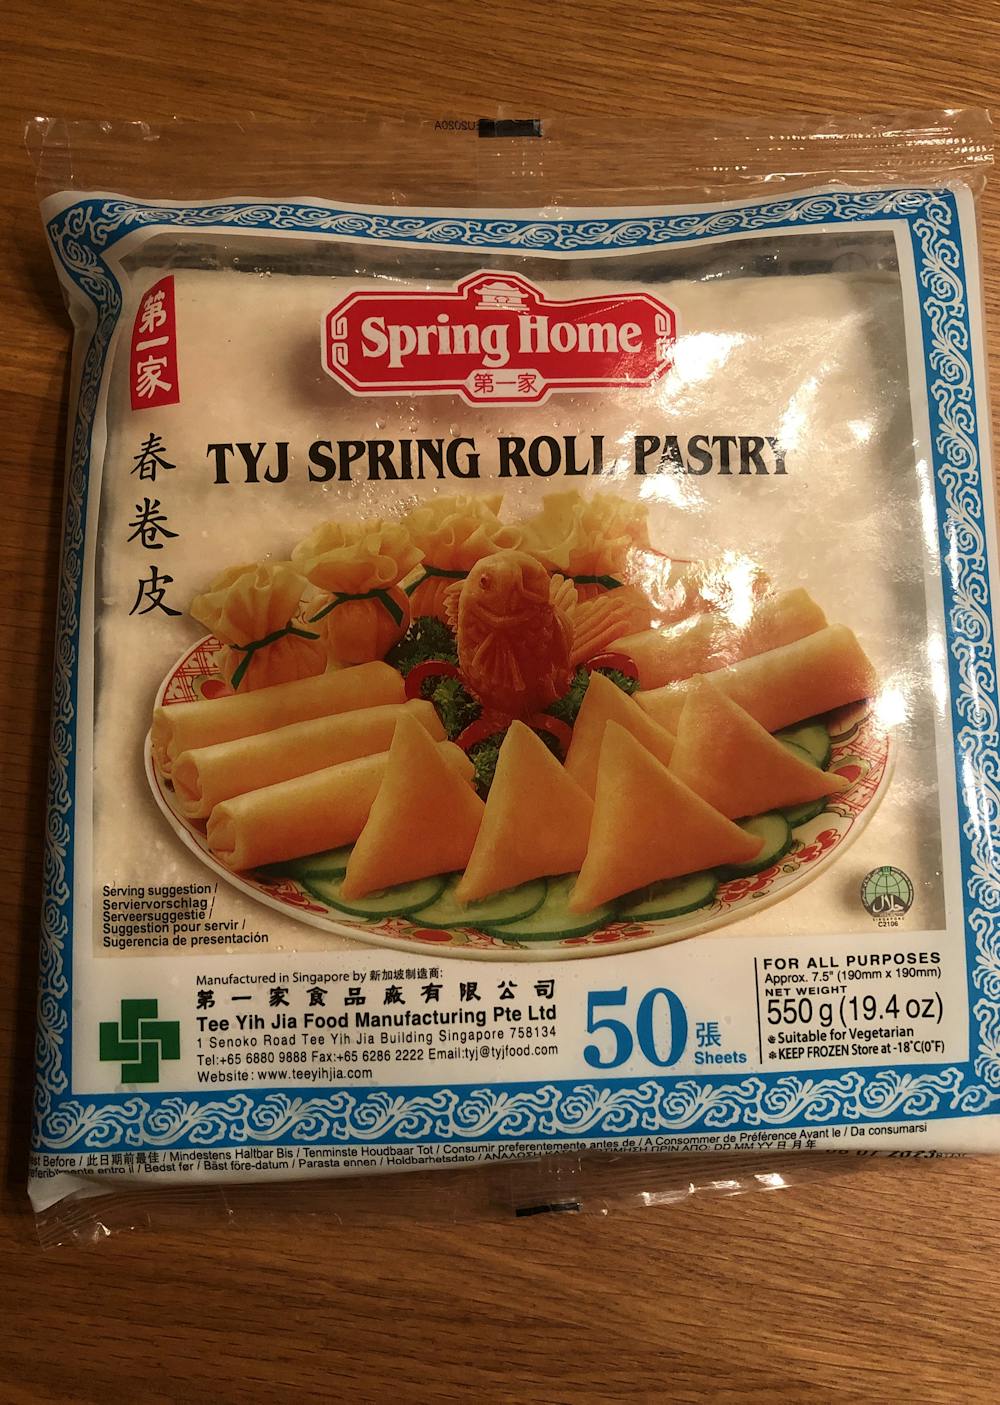 Tyj spring roll pastry, Spring home